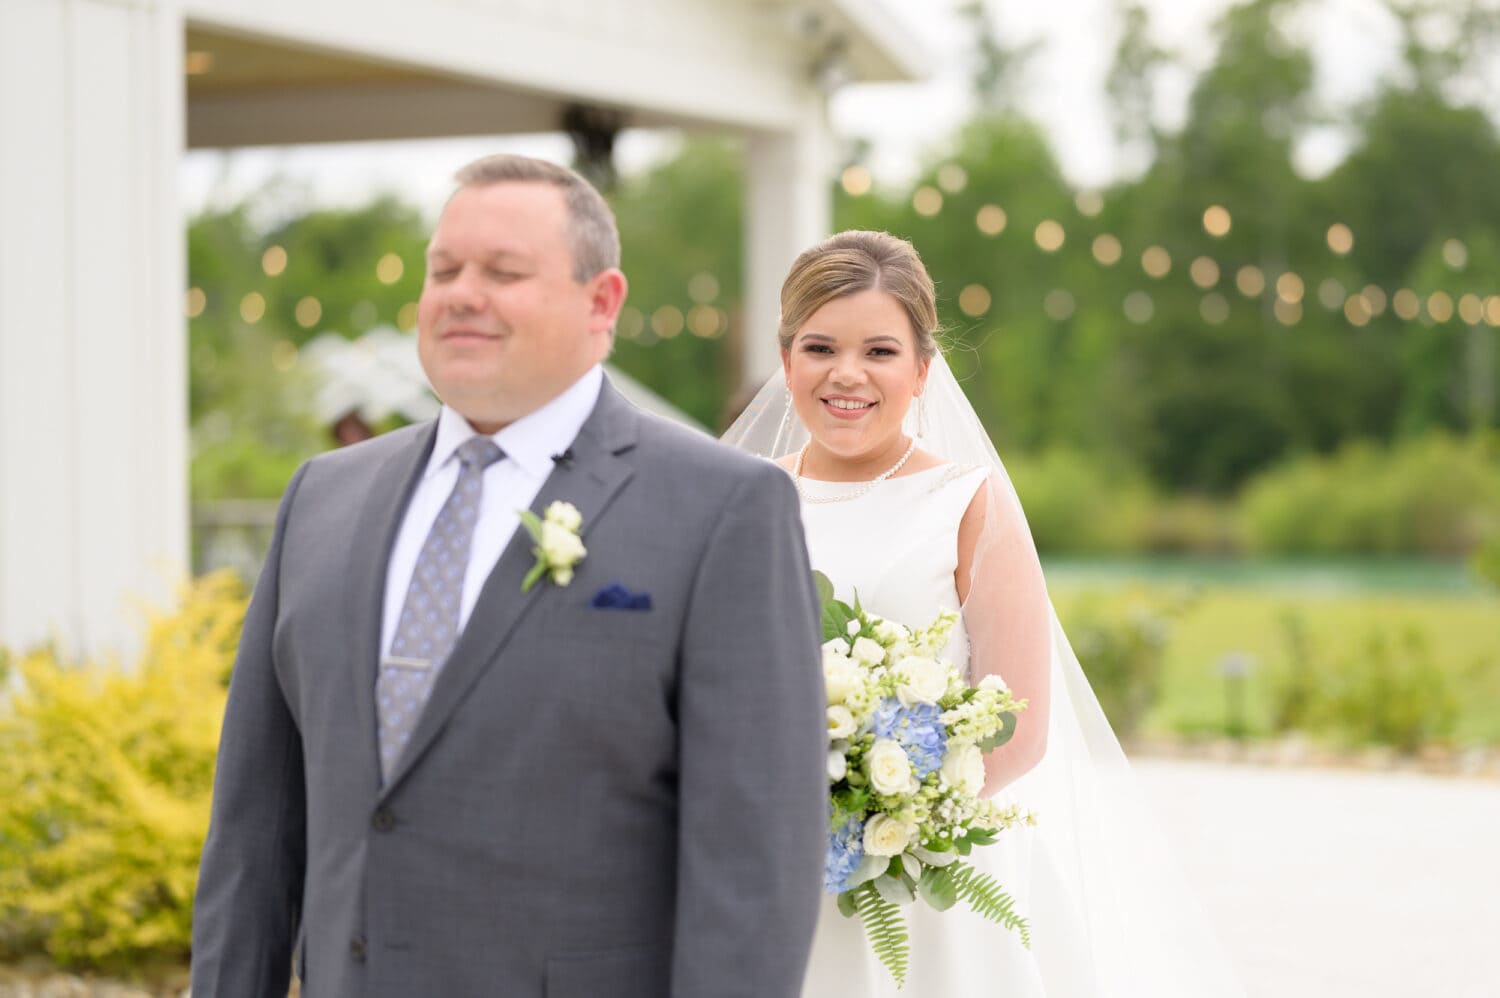 First look with bride and father - The Venue at White Oaks Farm